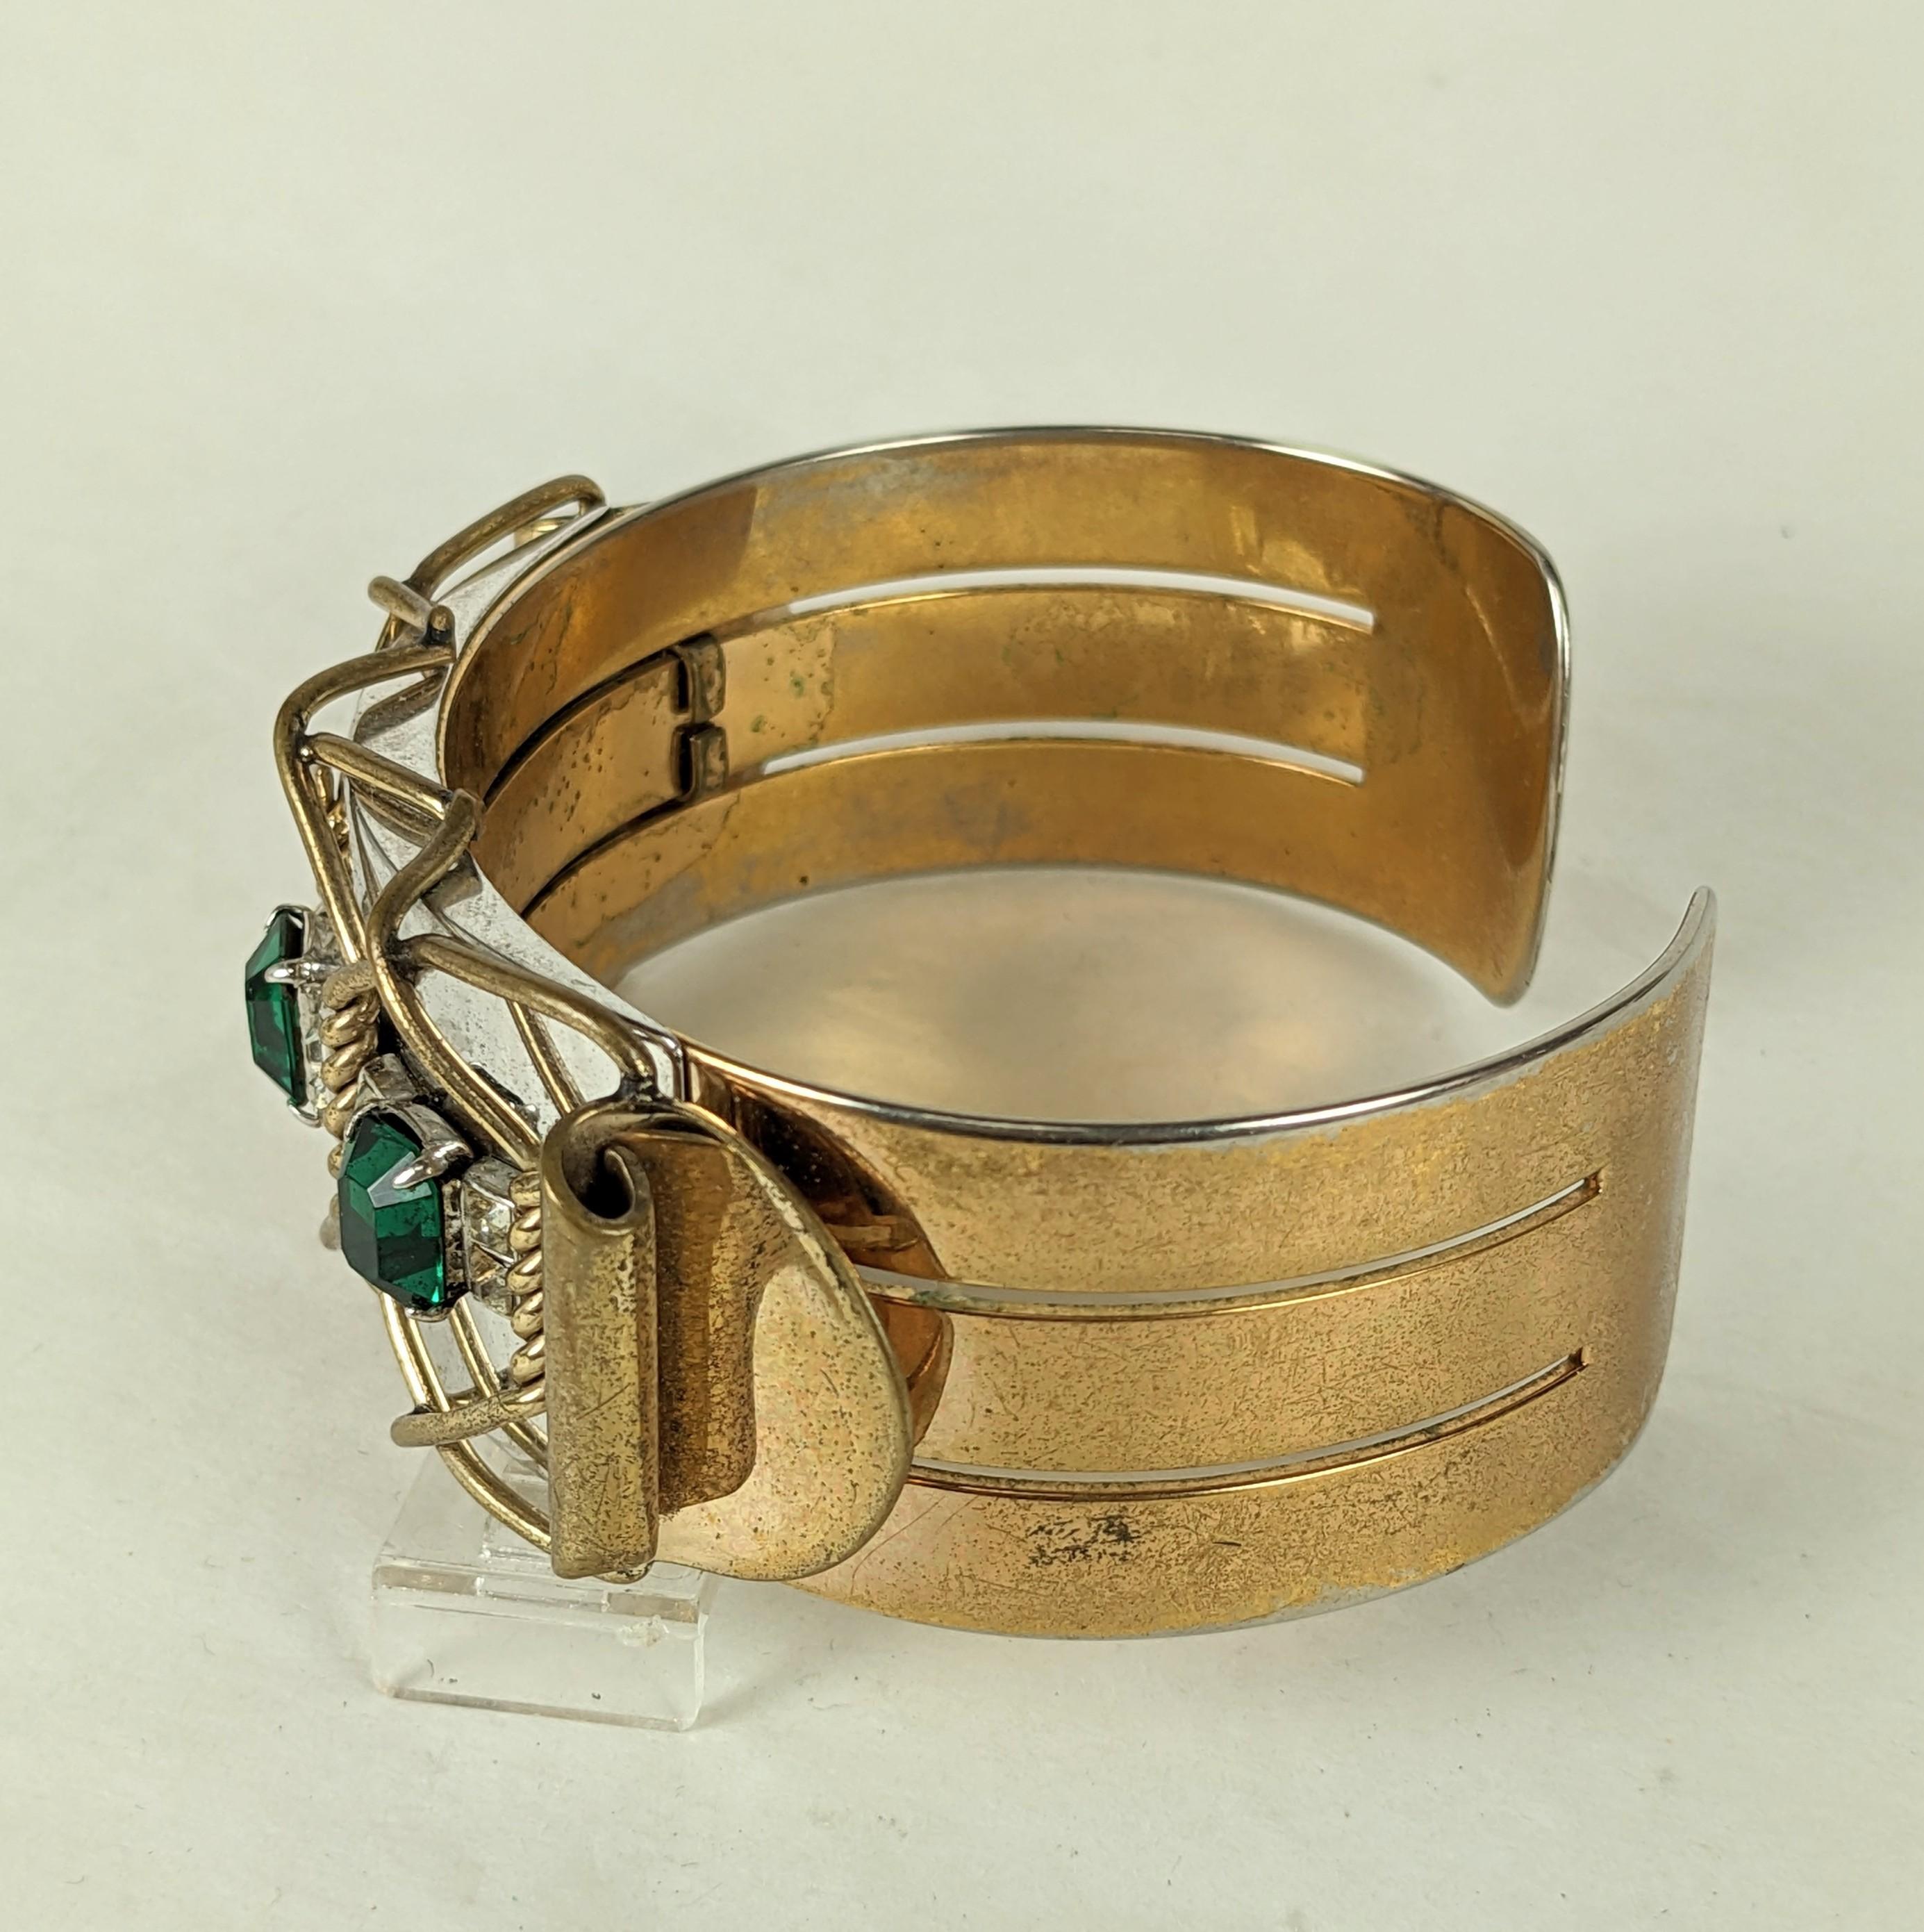 Kreisler Two Toned Retro Cuff In Good Condition For Sale In New York, NY